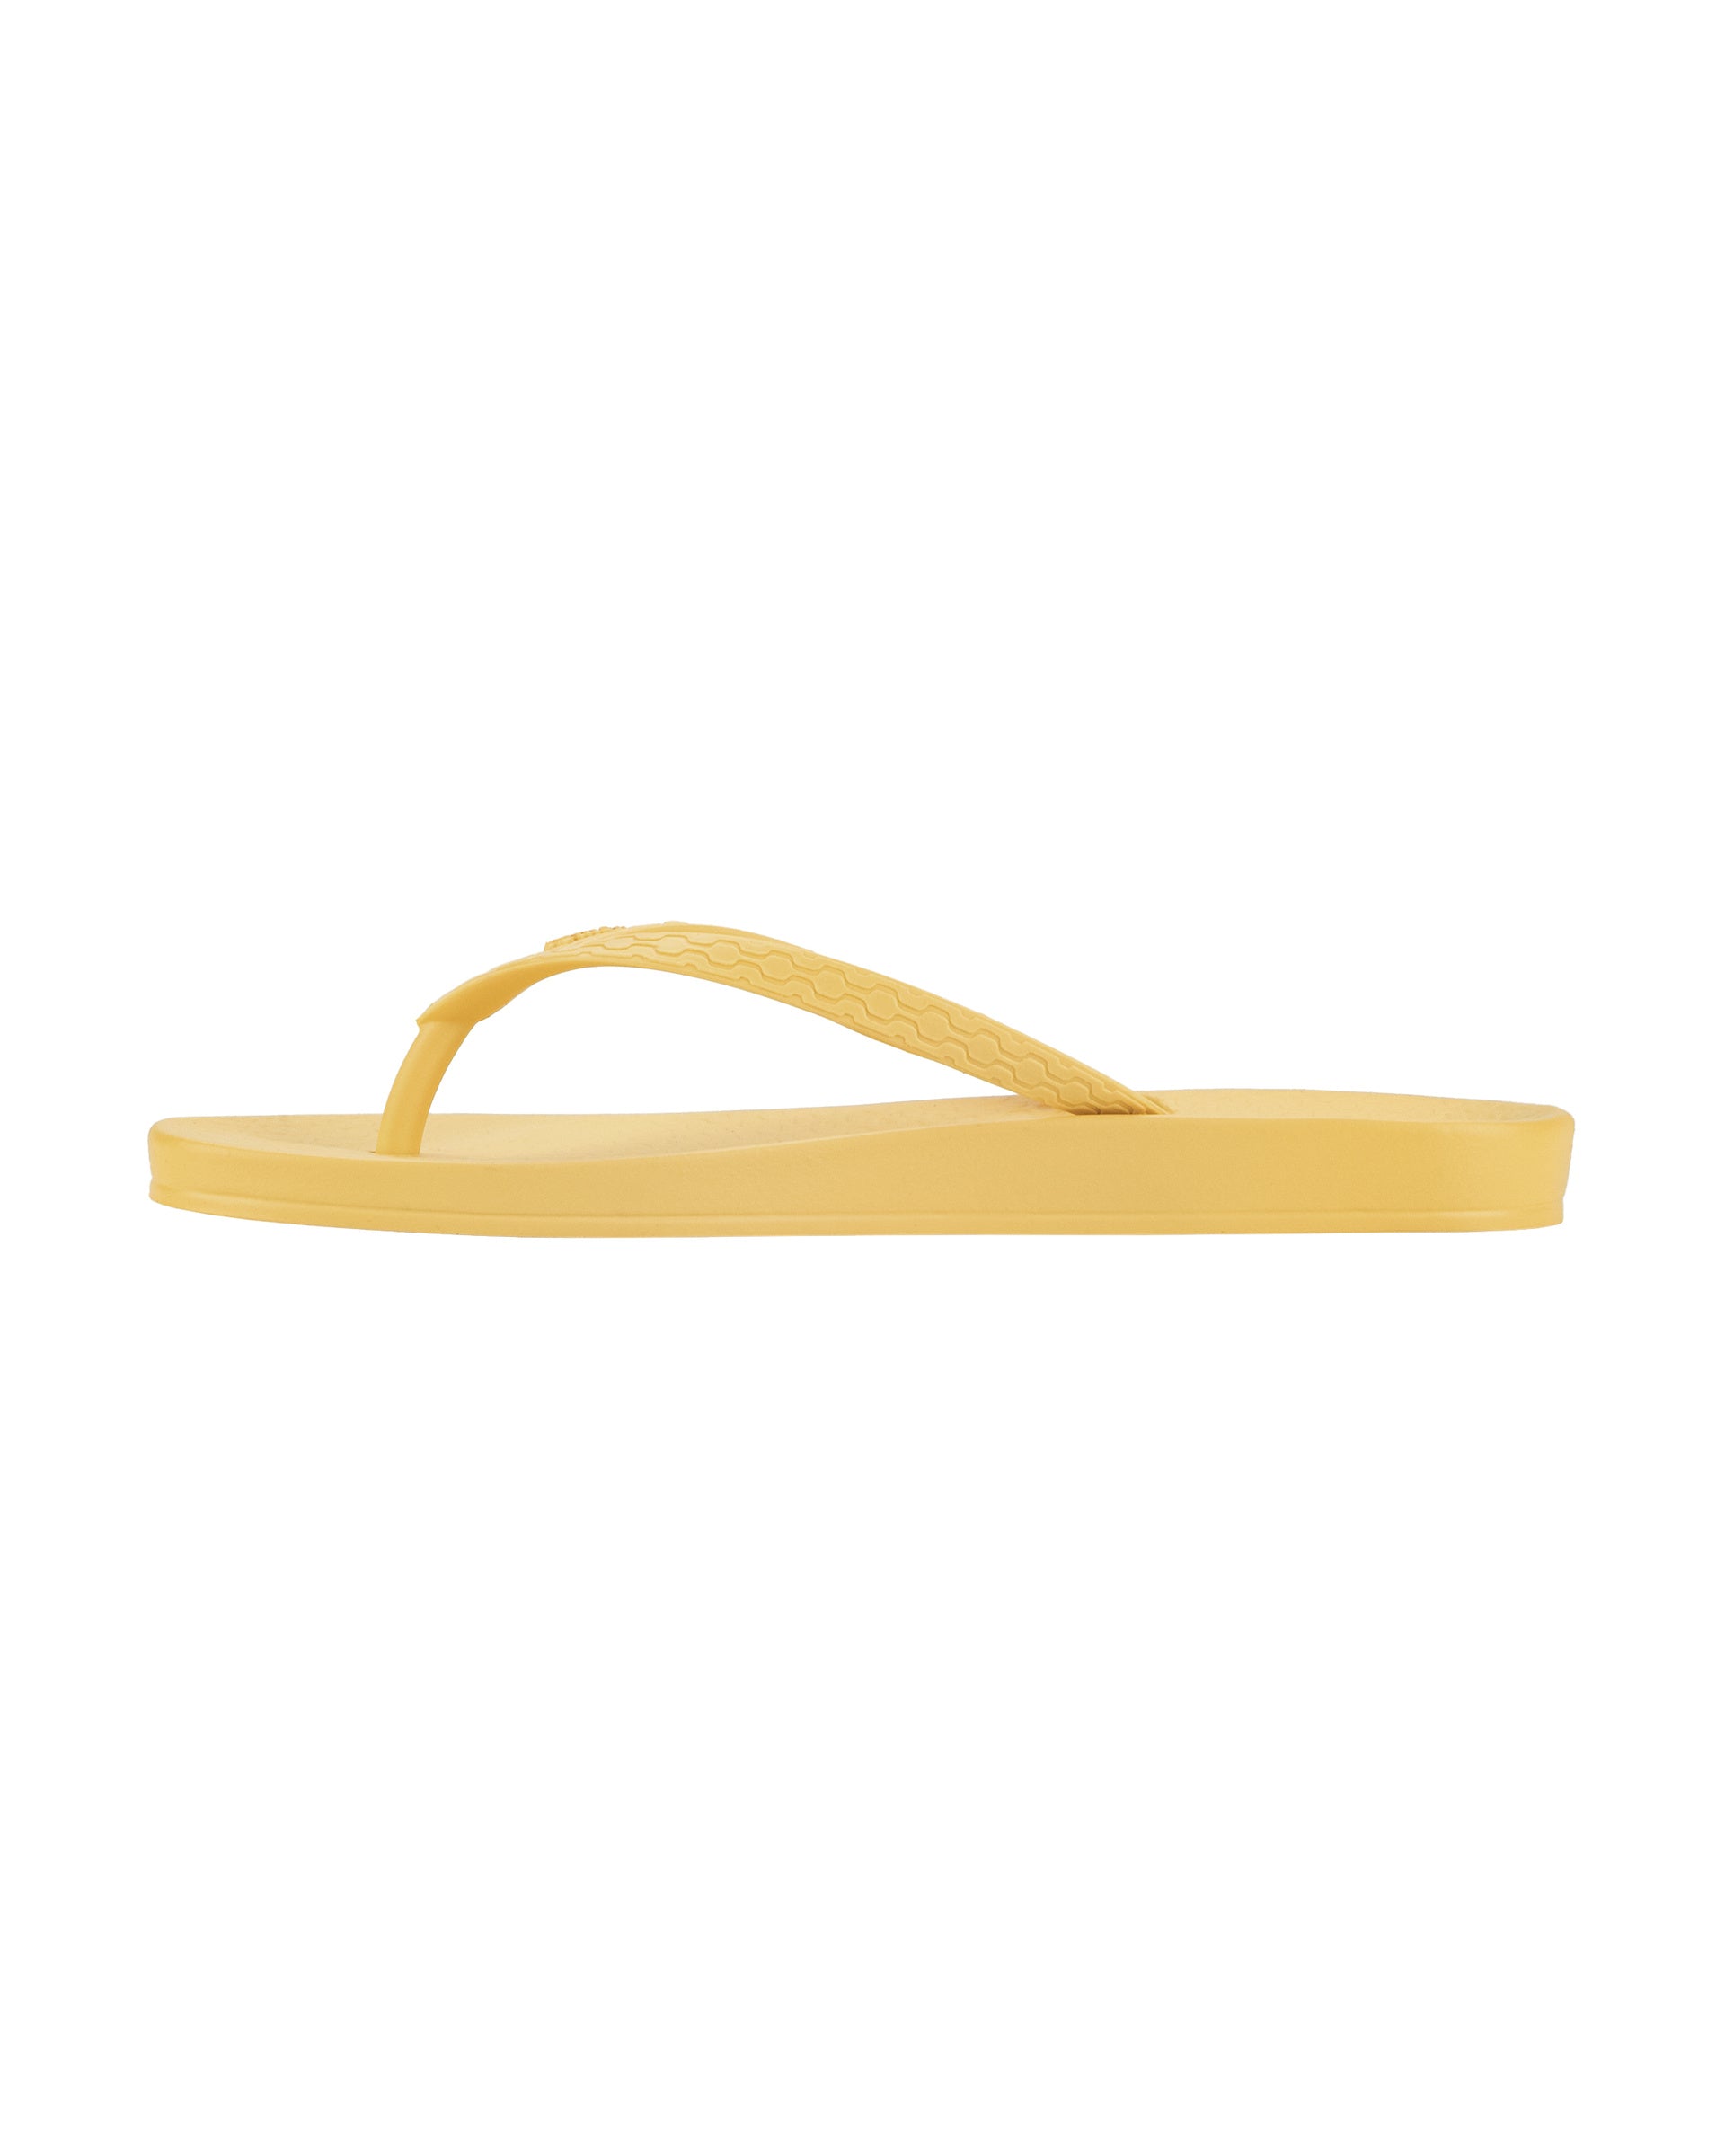 Inner side view of a yellow Ipanema Ana Colors women's flip flop.